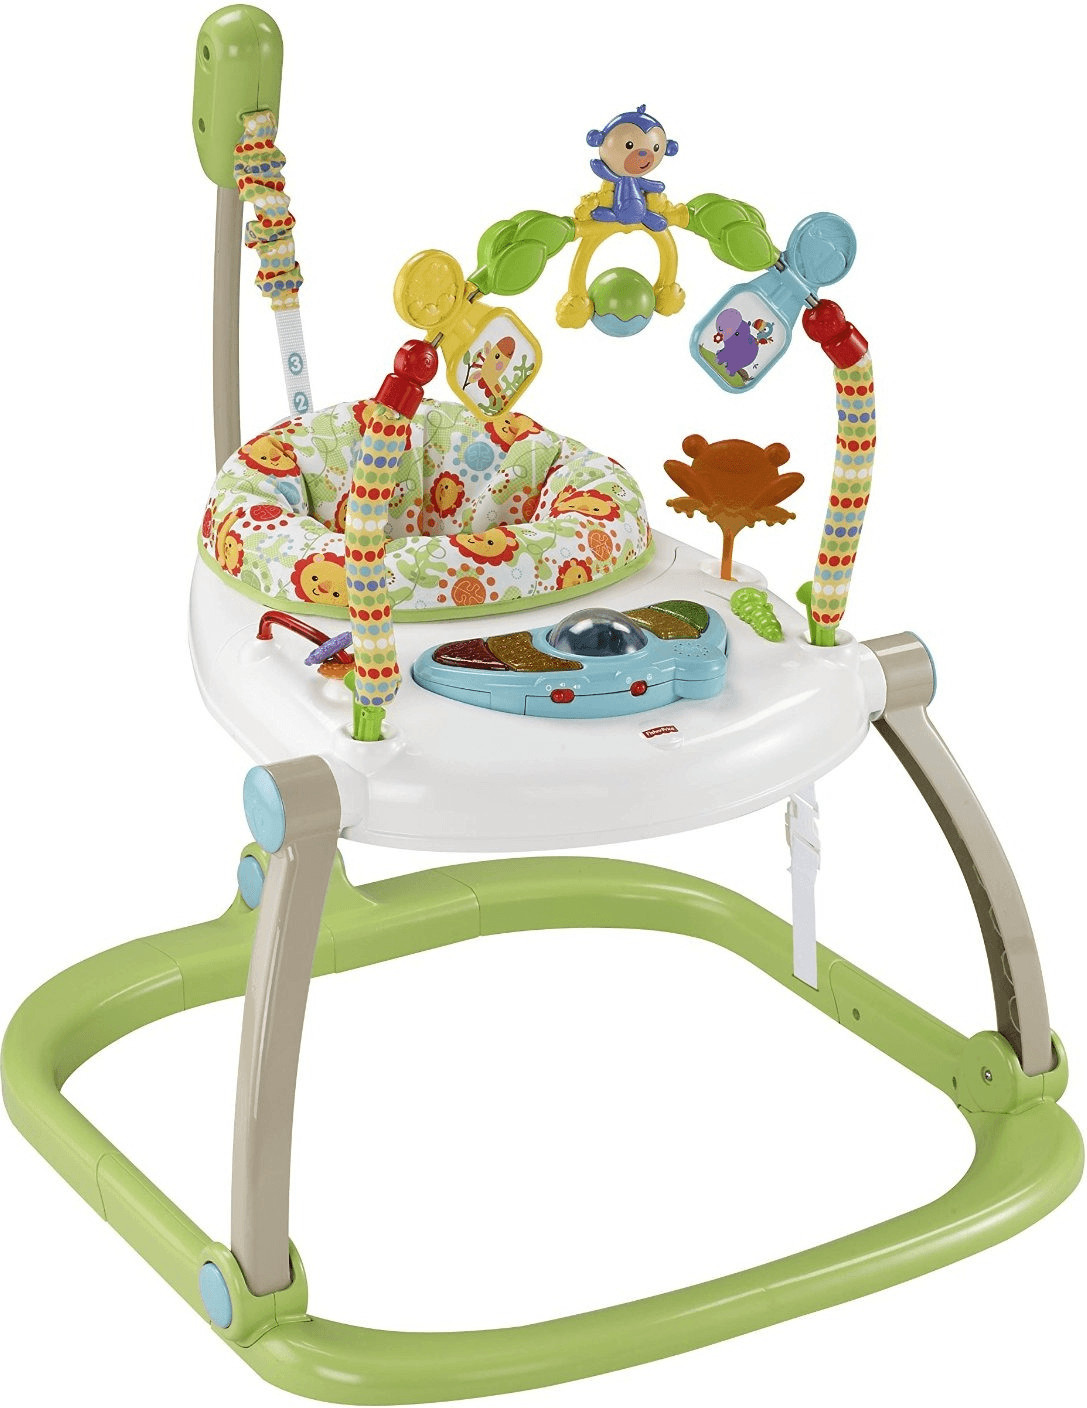 Photos - Baby Walker Fisher Price Fisher-Price Fisher-Price Rainforest Friends SpaceSaver Jumperoo 